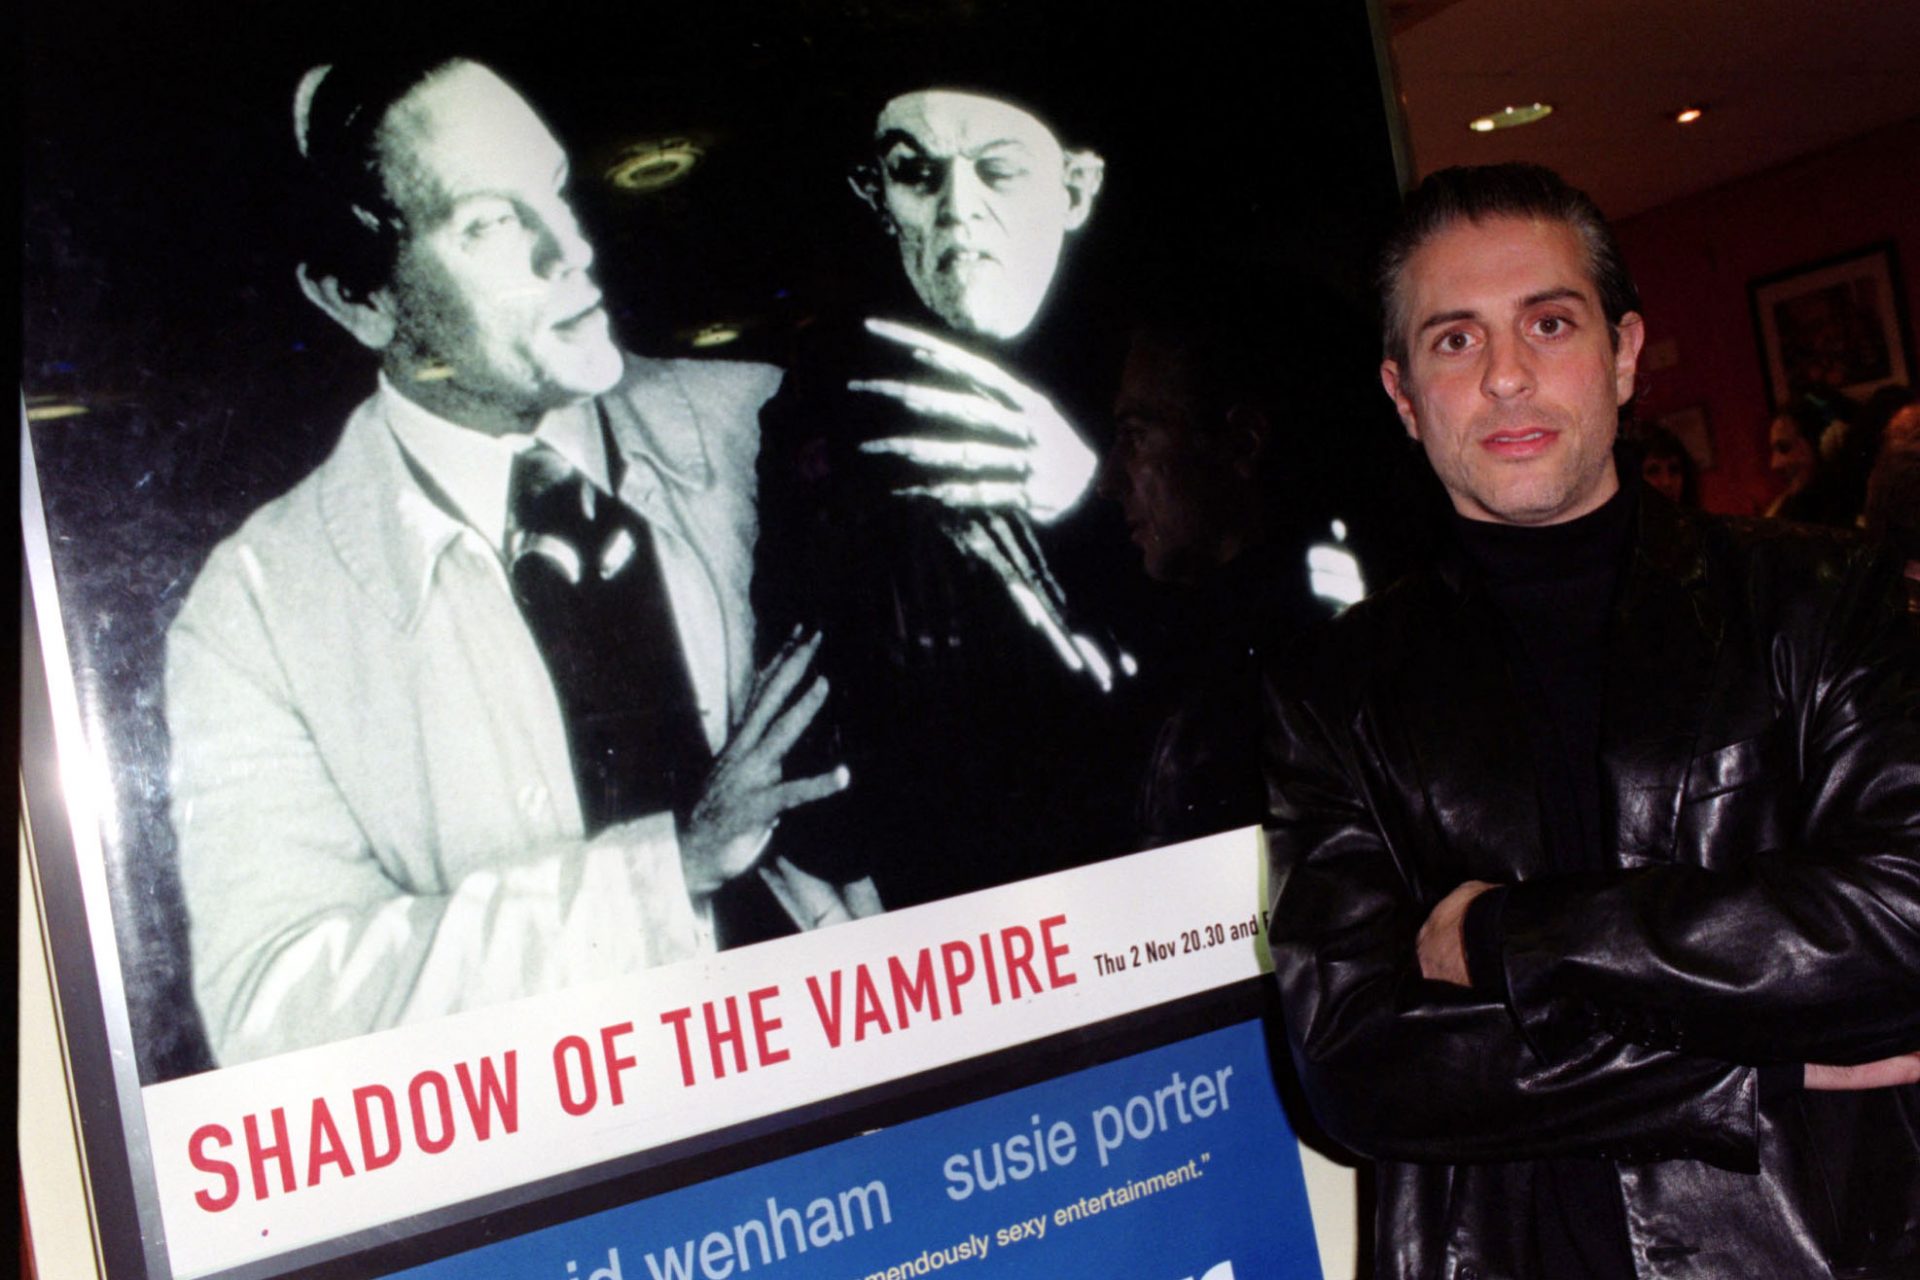 Homage to 'Nosferatu' in 'The Shadow of the Vampire'